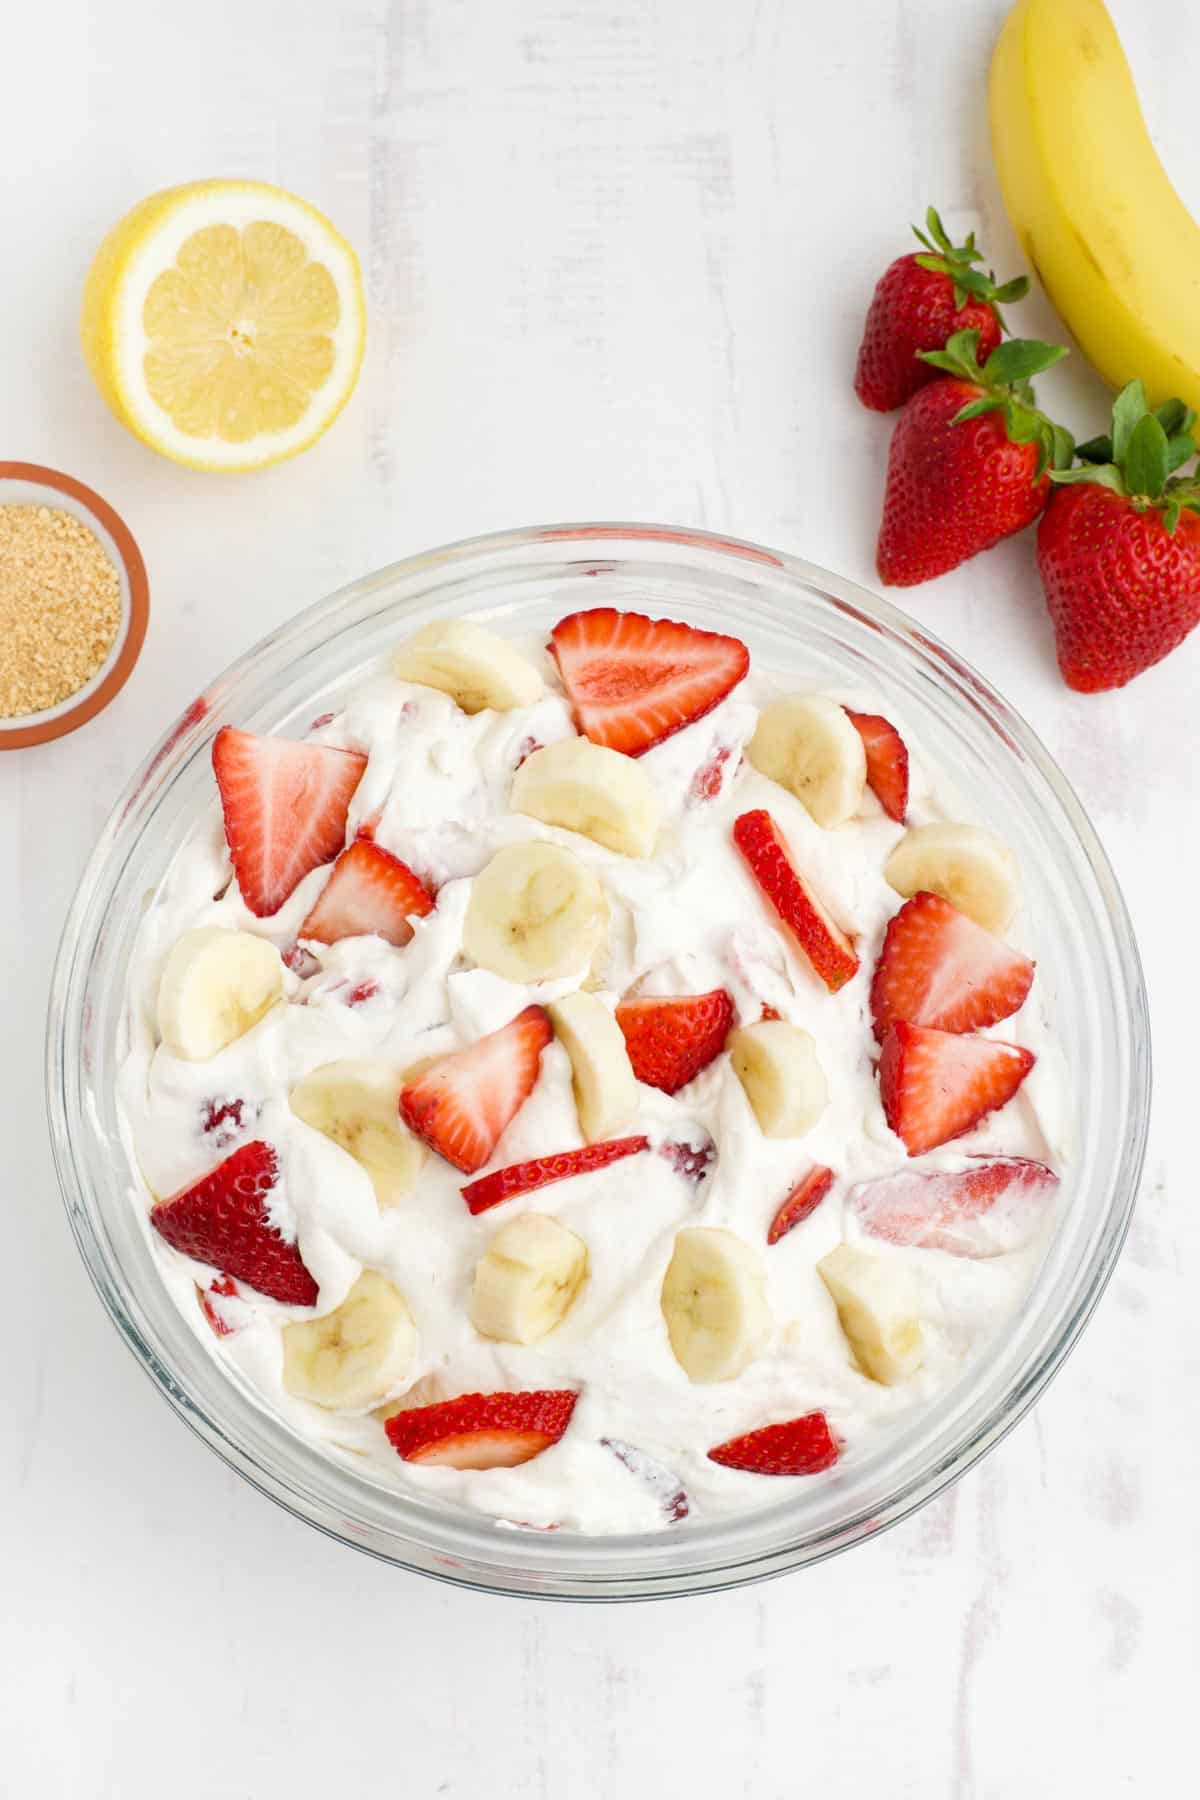 Bananas and strawberries mixed into the creamy cheesecake mixture.